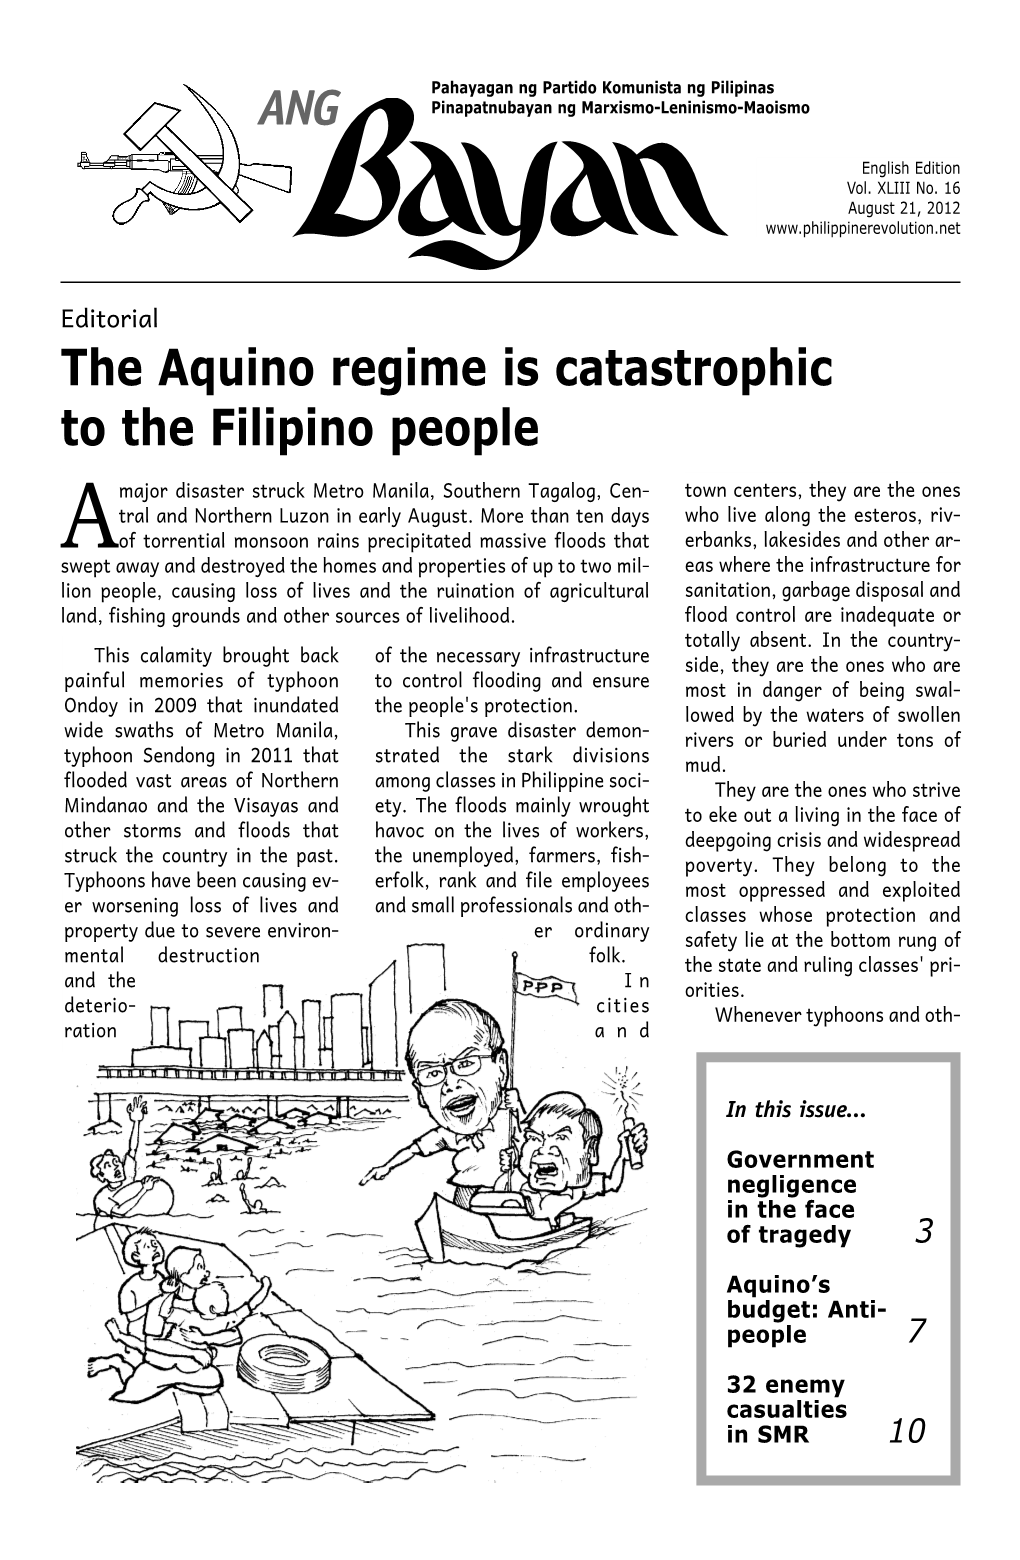 ANG the Aquino Regime Is Catastrophic to the Filipino People